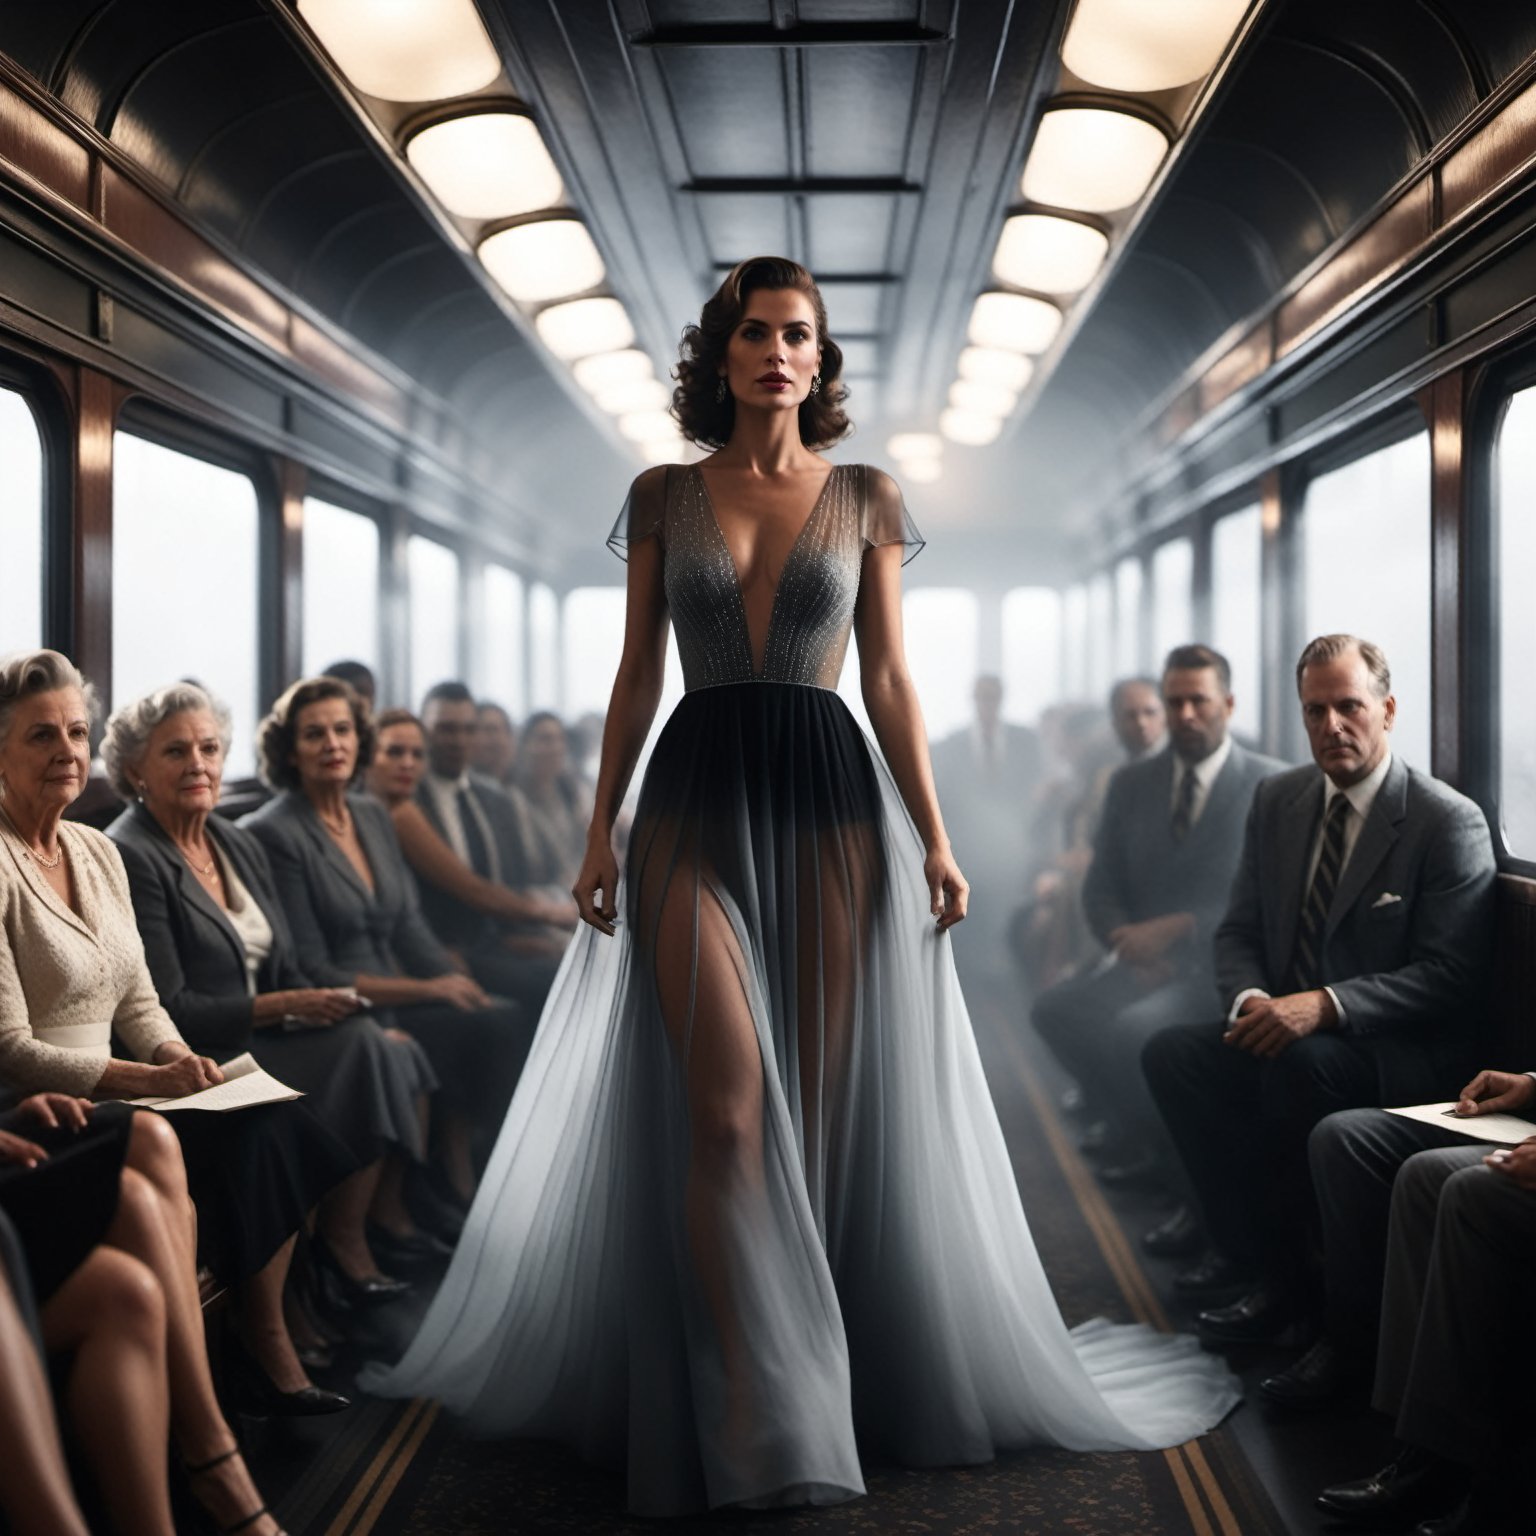 woman emerging from the darkness wearing a sheer flowing transparent dress, black and grey gradient, foggy, realistic, 8k, unreal engine, cinematic, walking down the aisle inside of a crowded 1940's passenger traincar full of people